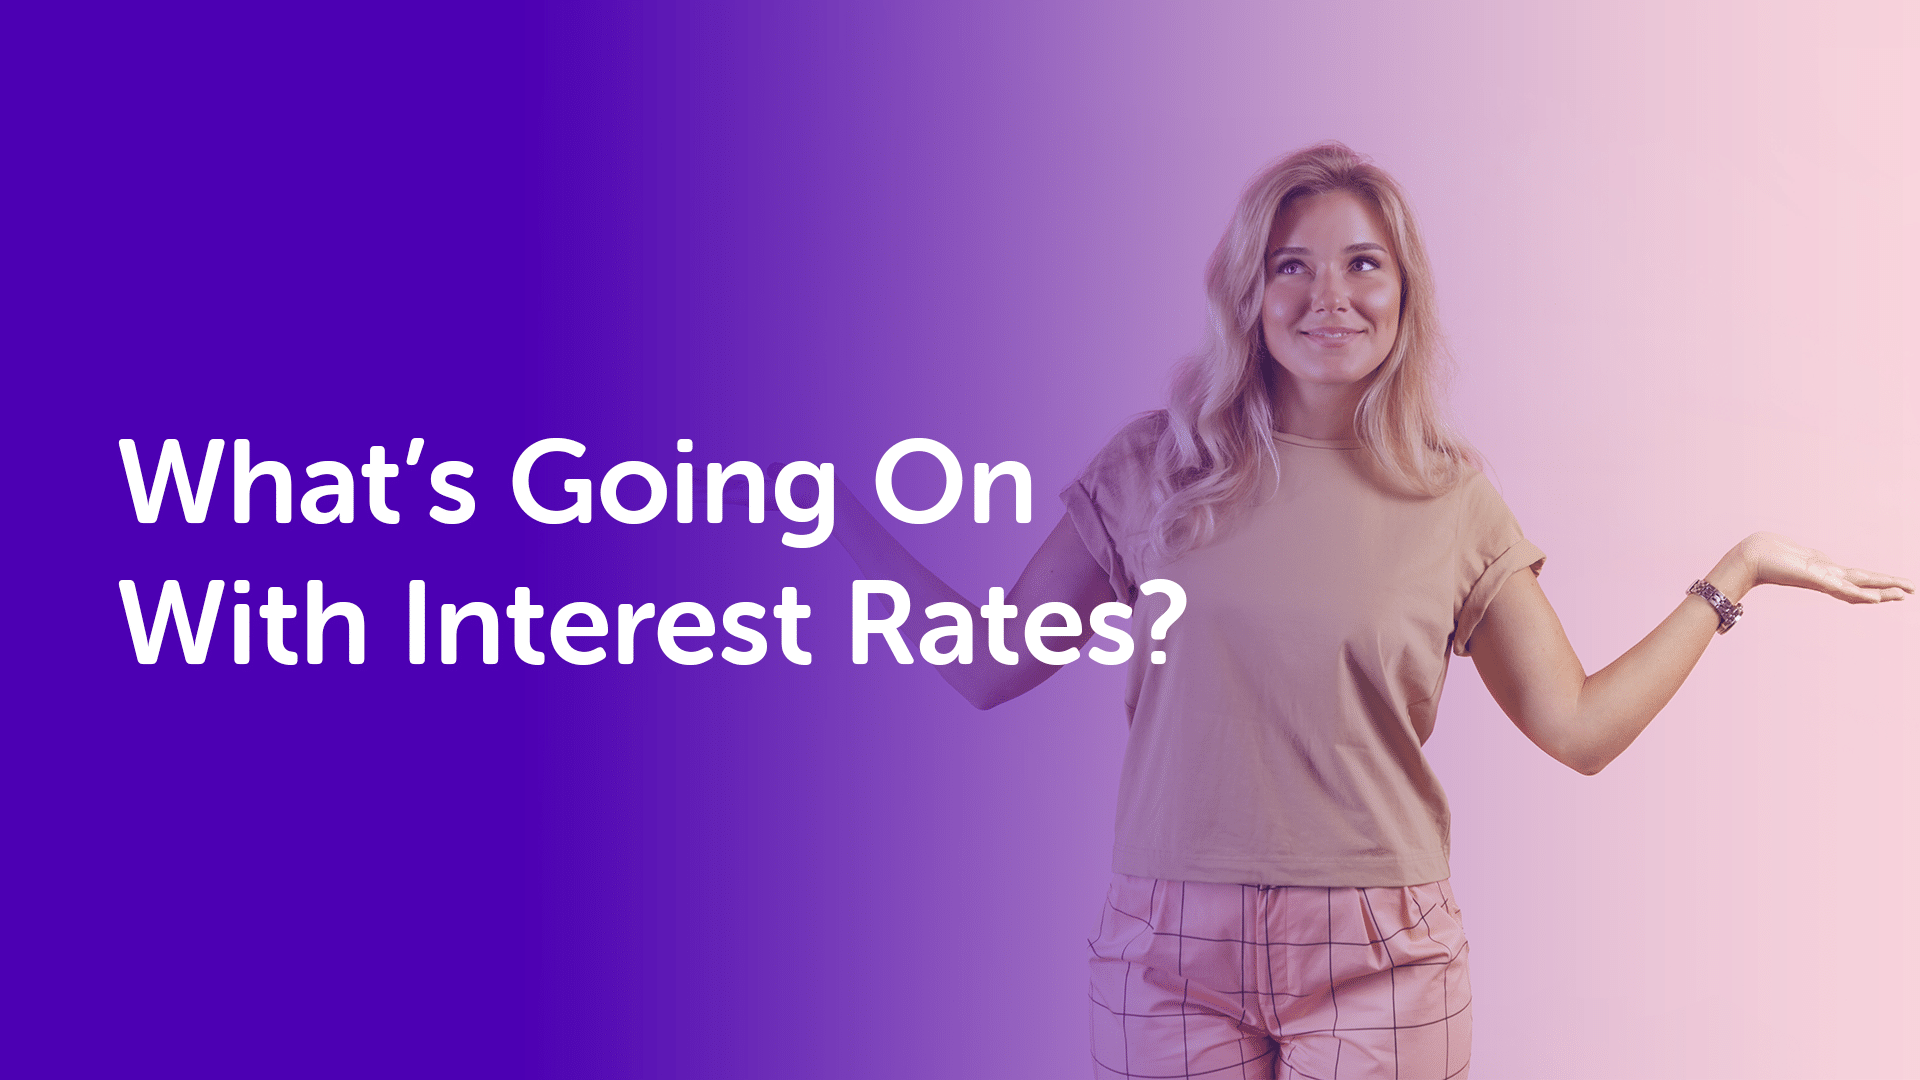 What's Going on With Interest Rates